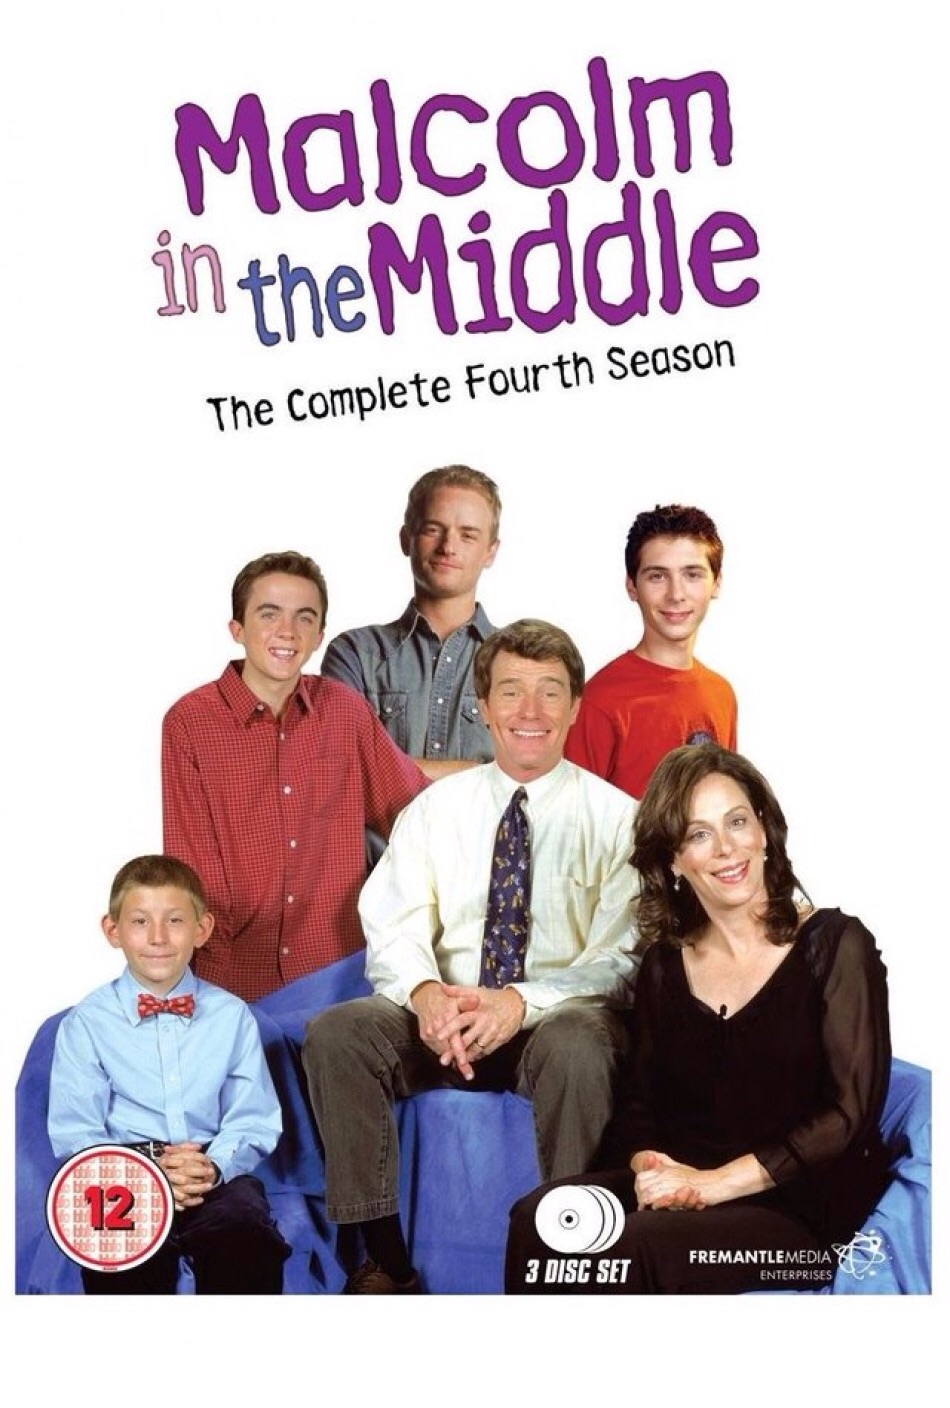 Nice Images Collection: Malcolm In The Middle  Desktop Wallpapers